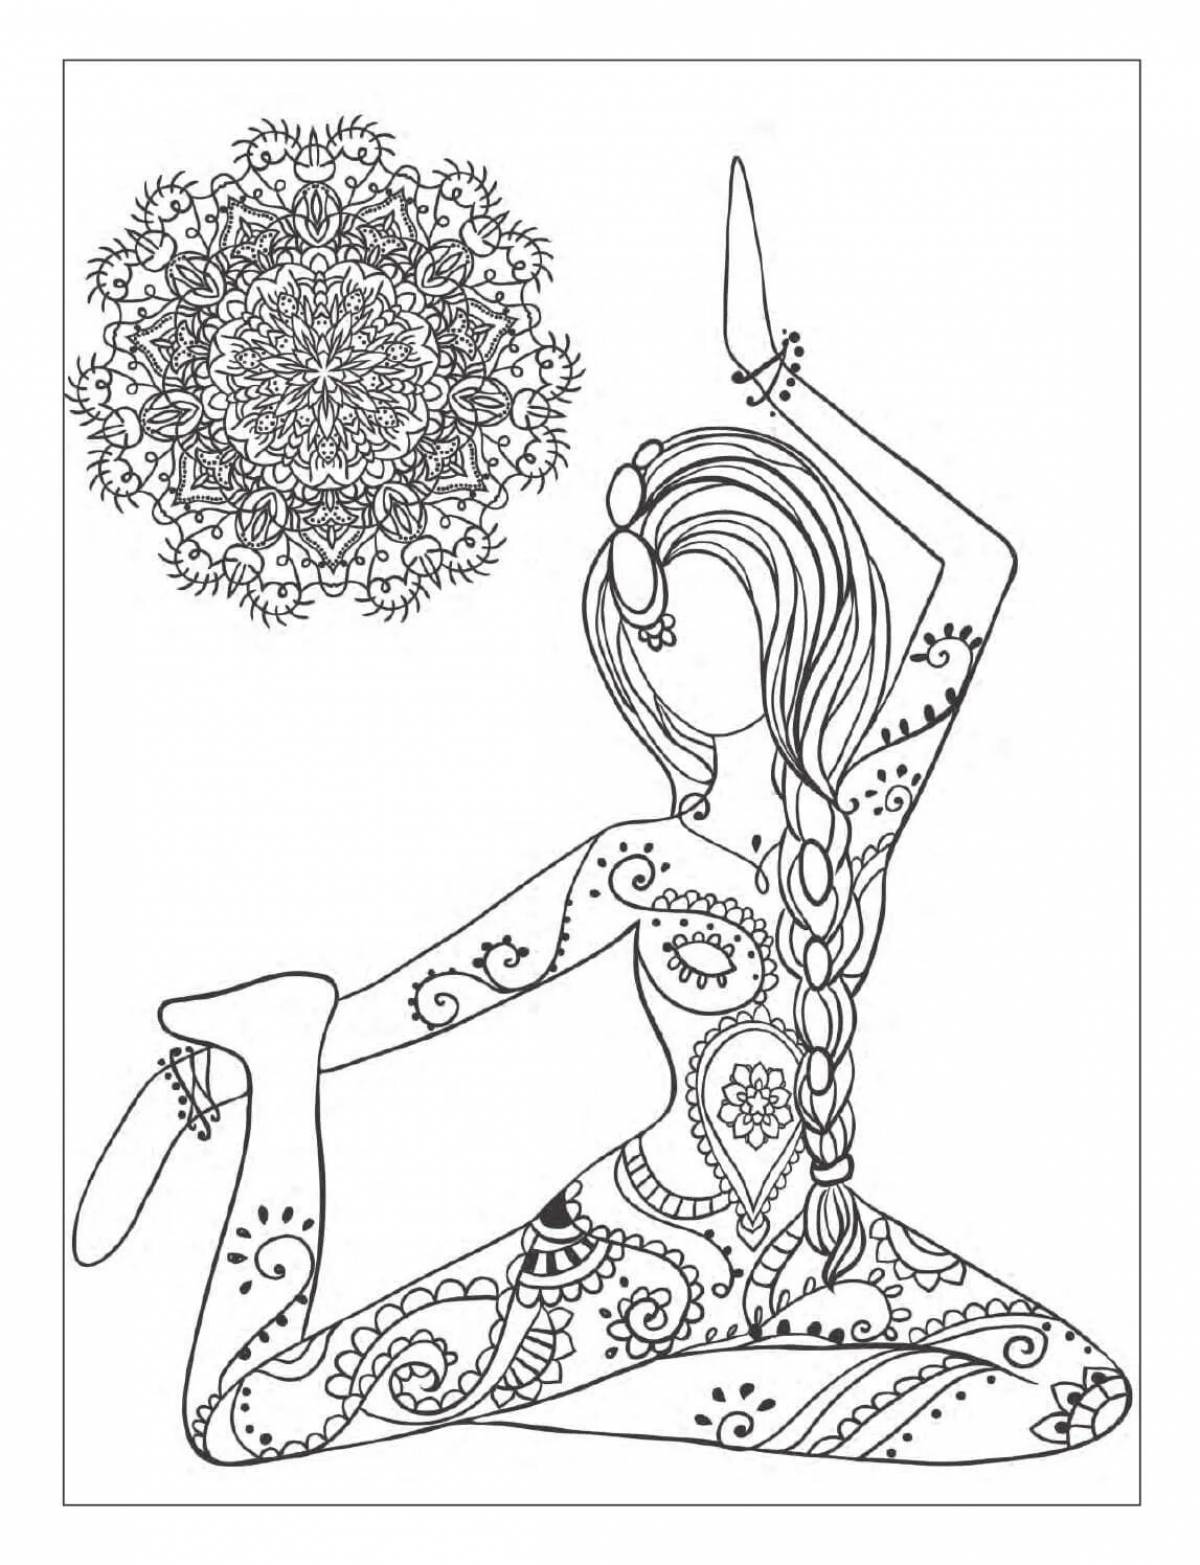 Delightful meditation coloring book for adults